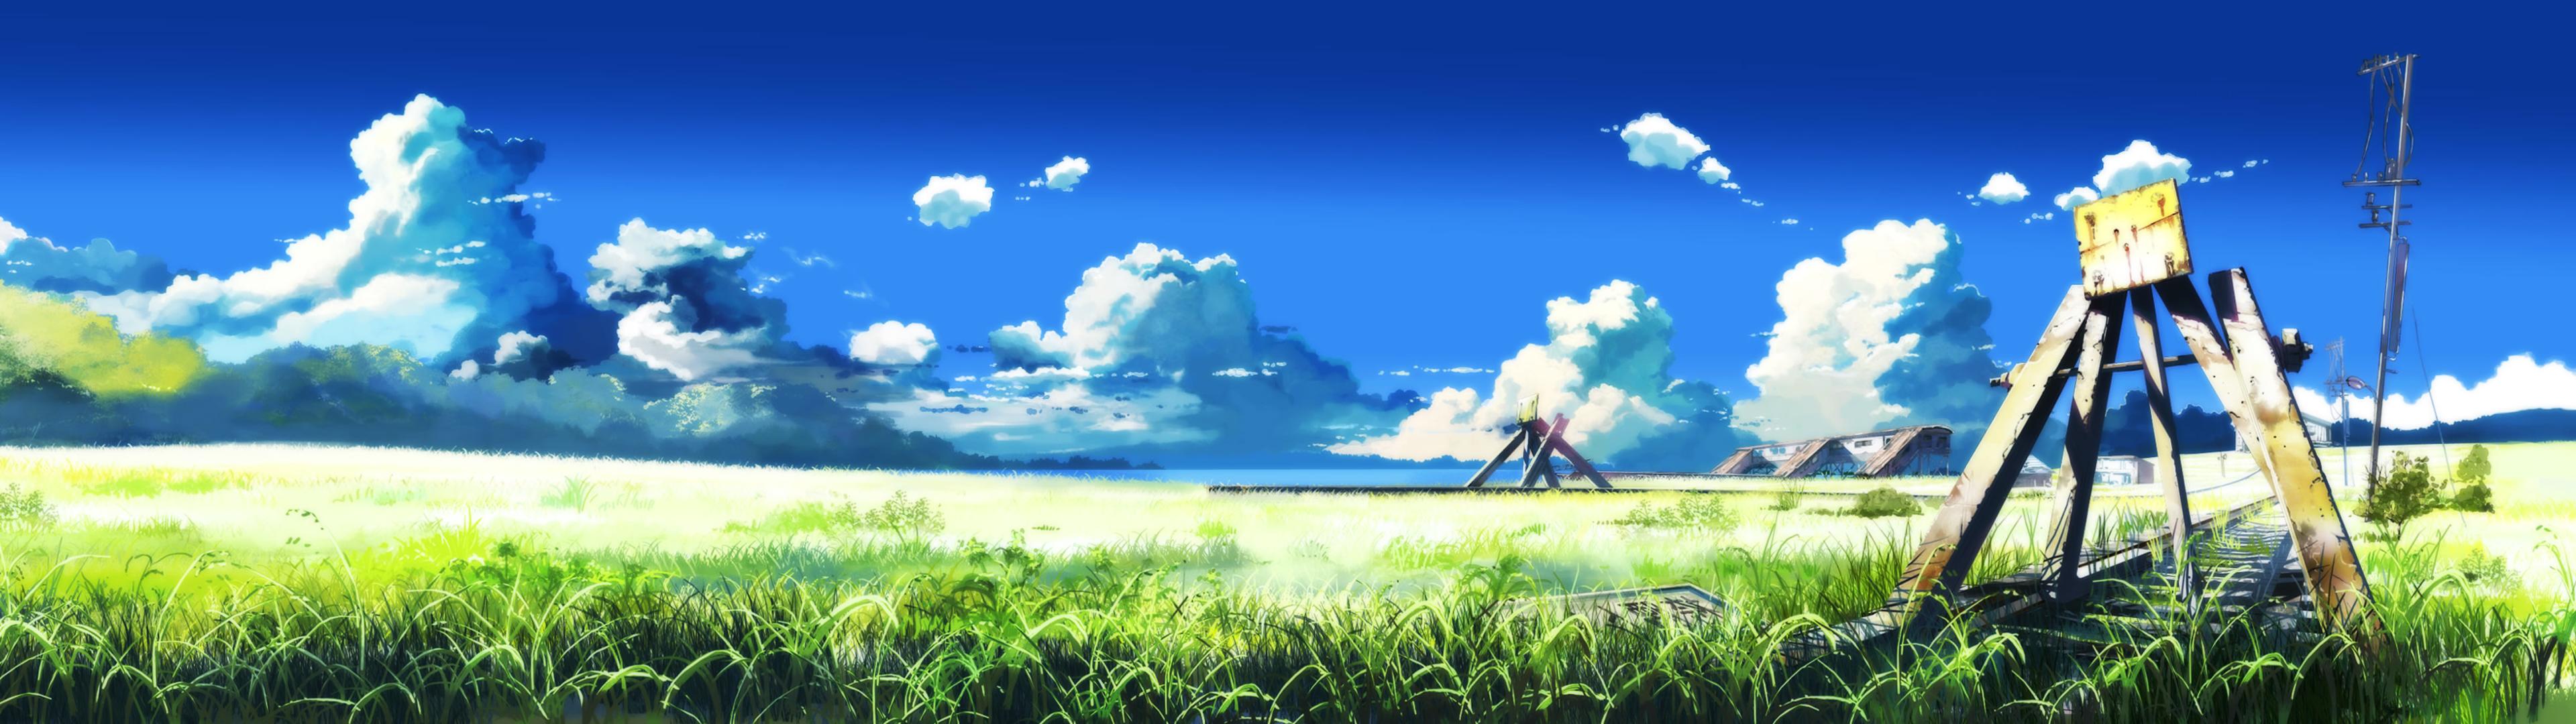 Collection of Anime Dual Monitor Wallpaper on HDWallpapers